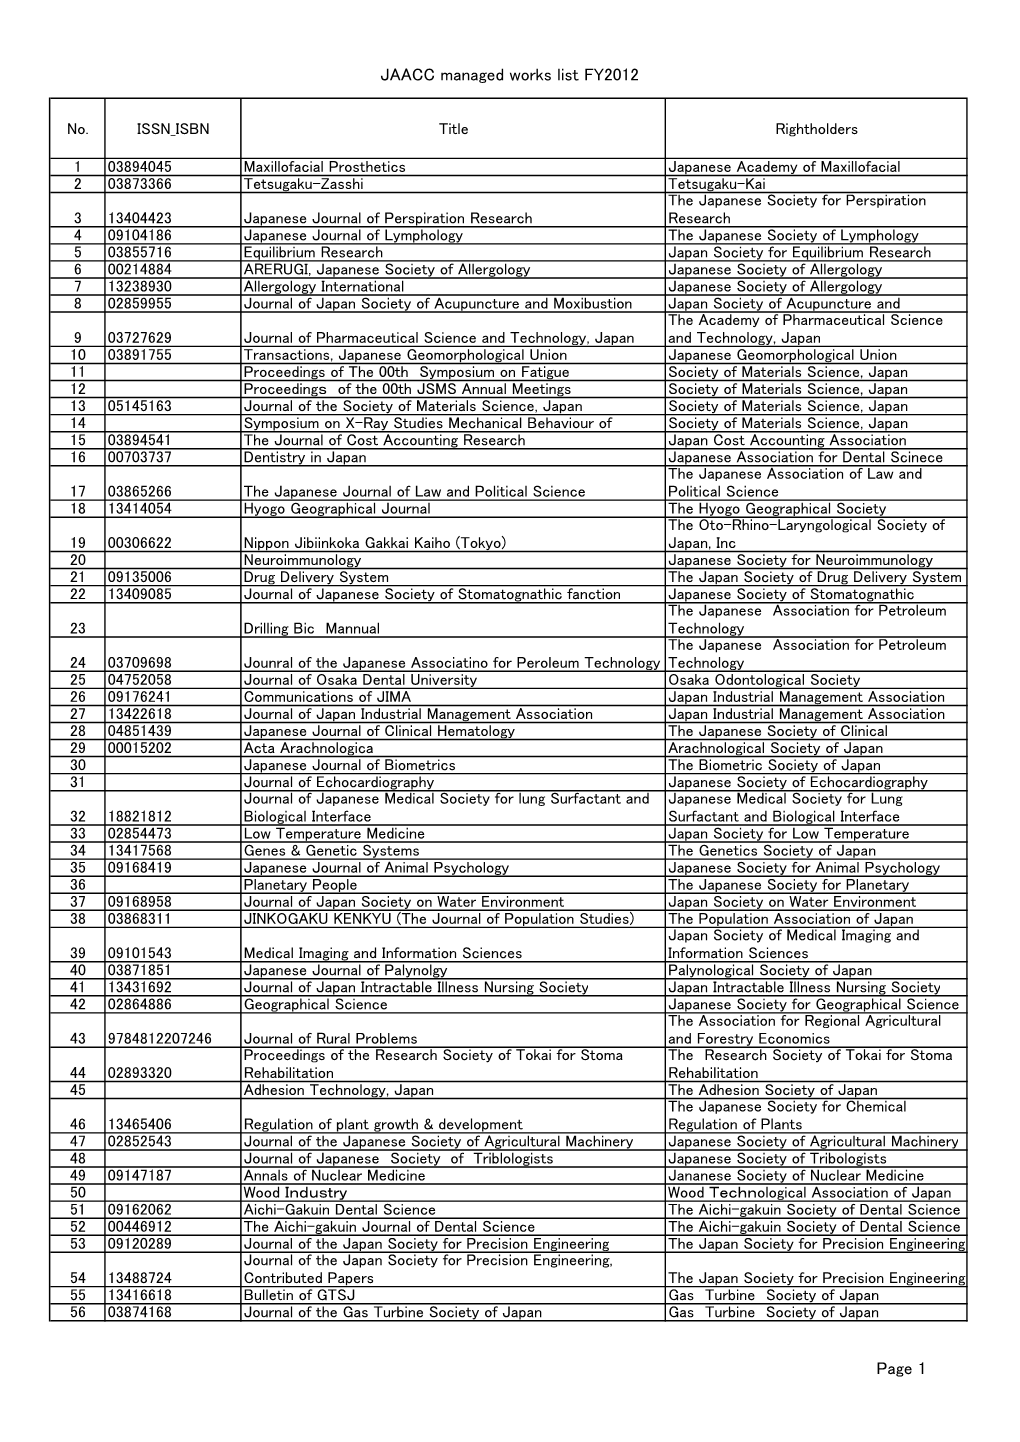 JAACC Managed Works List FY2012 Page 1